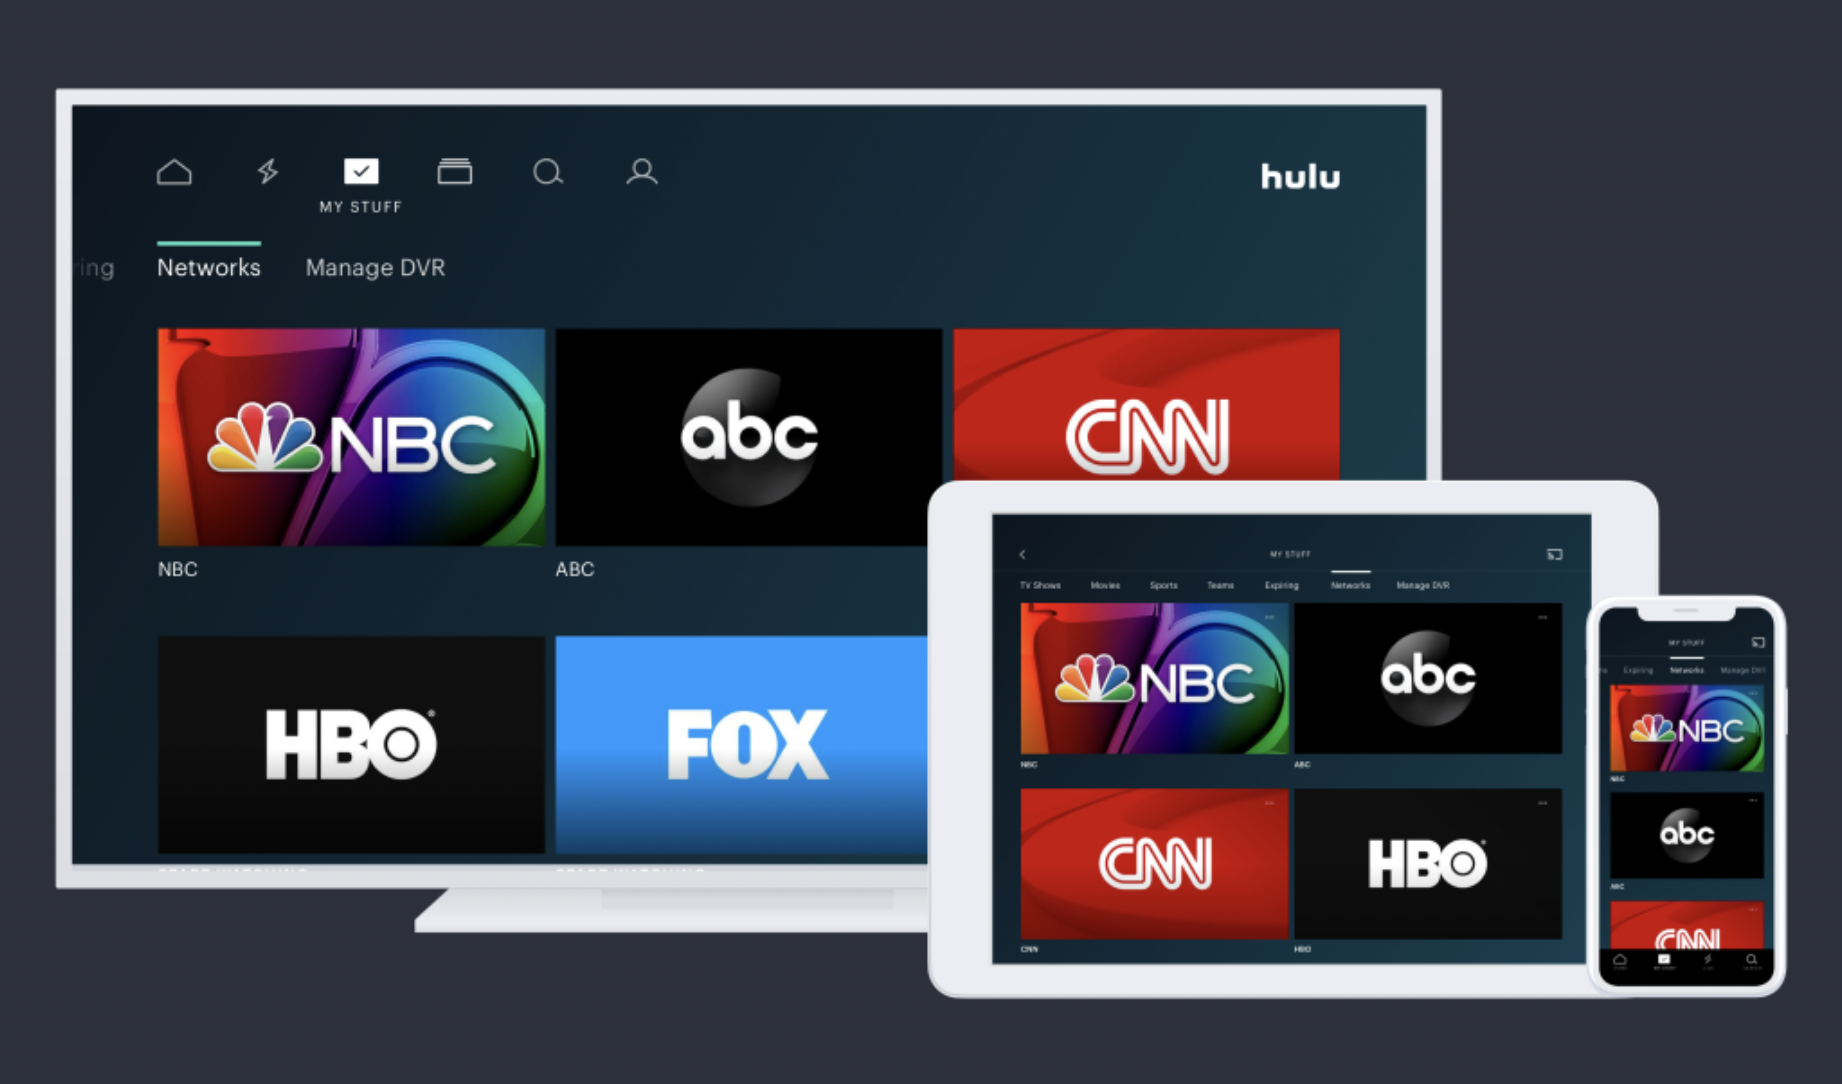 Should I Cancel Cable and Get Hulu + Live TV Instead? The PROS and CONS